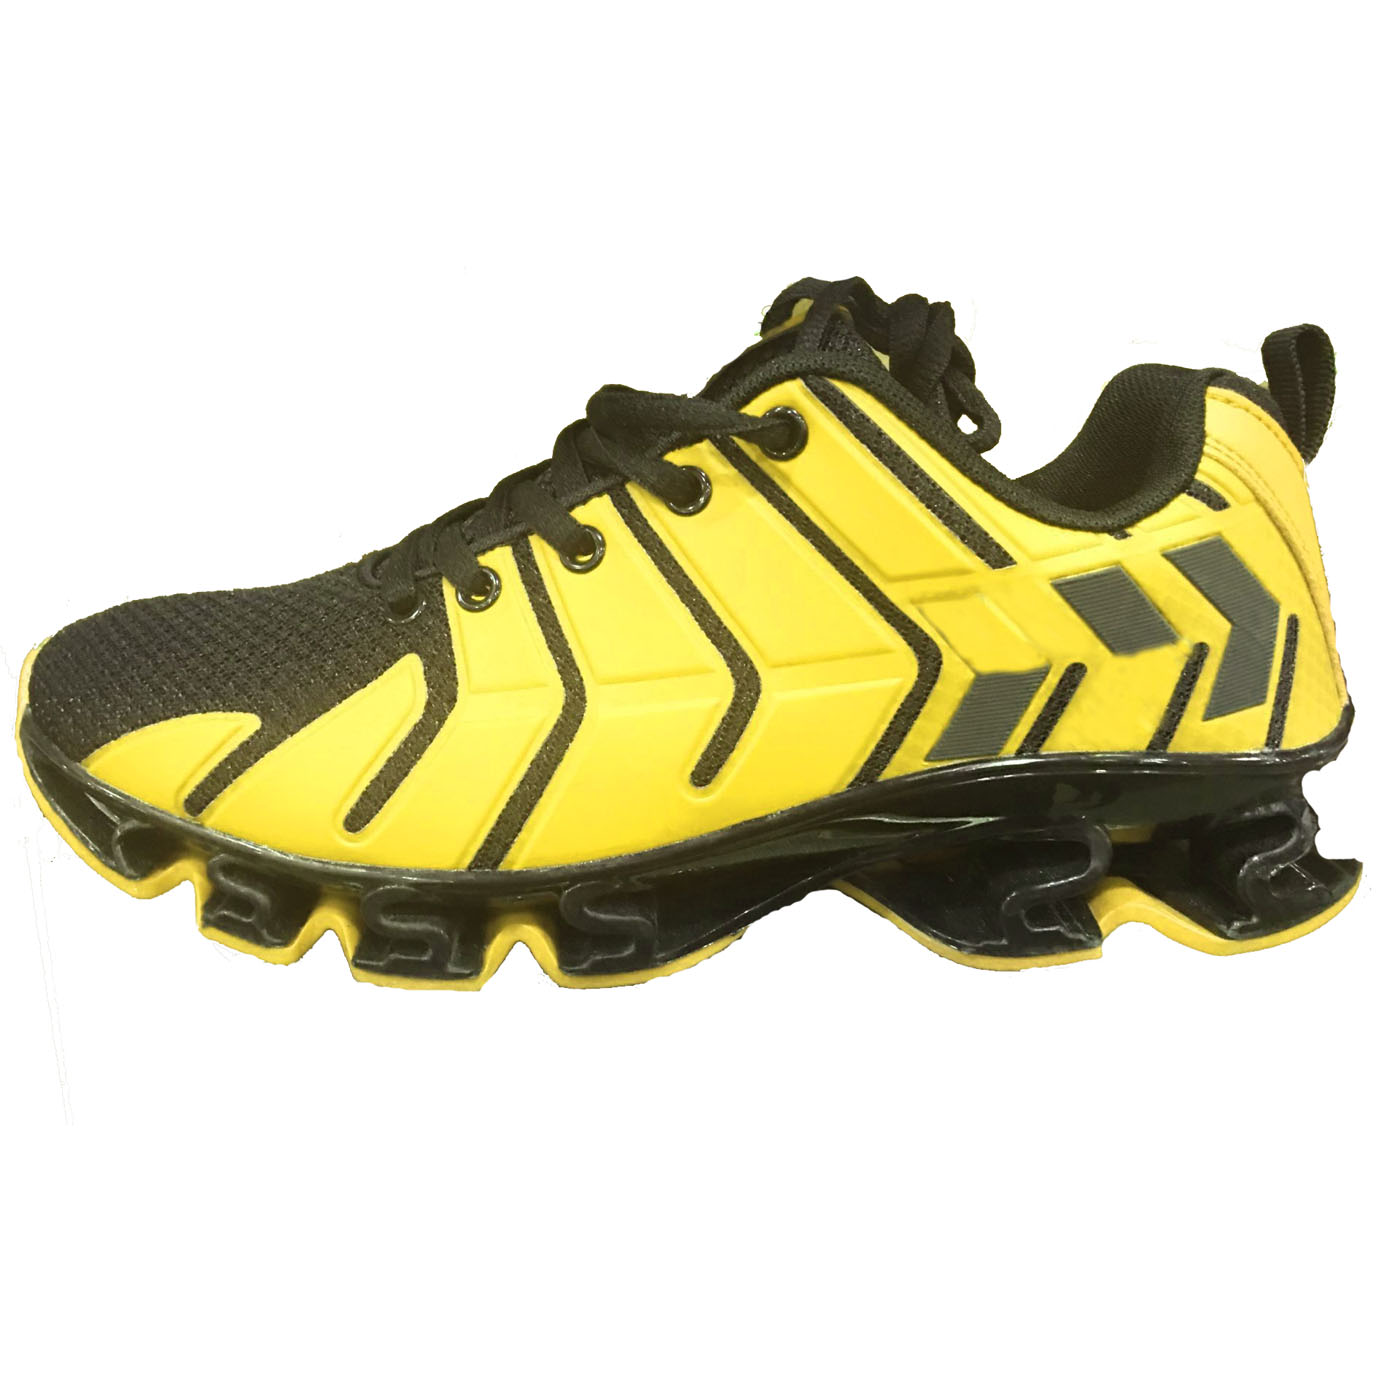 Sports Shoe Manufacturers in China